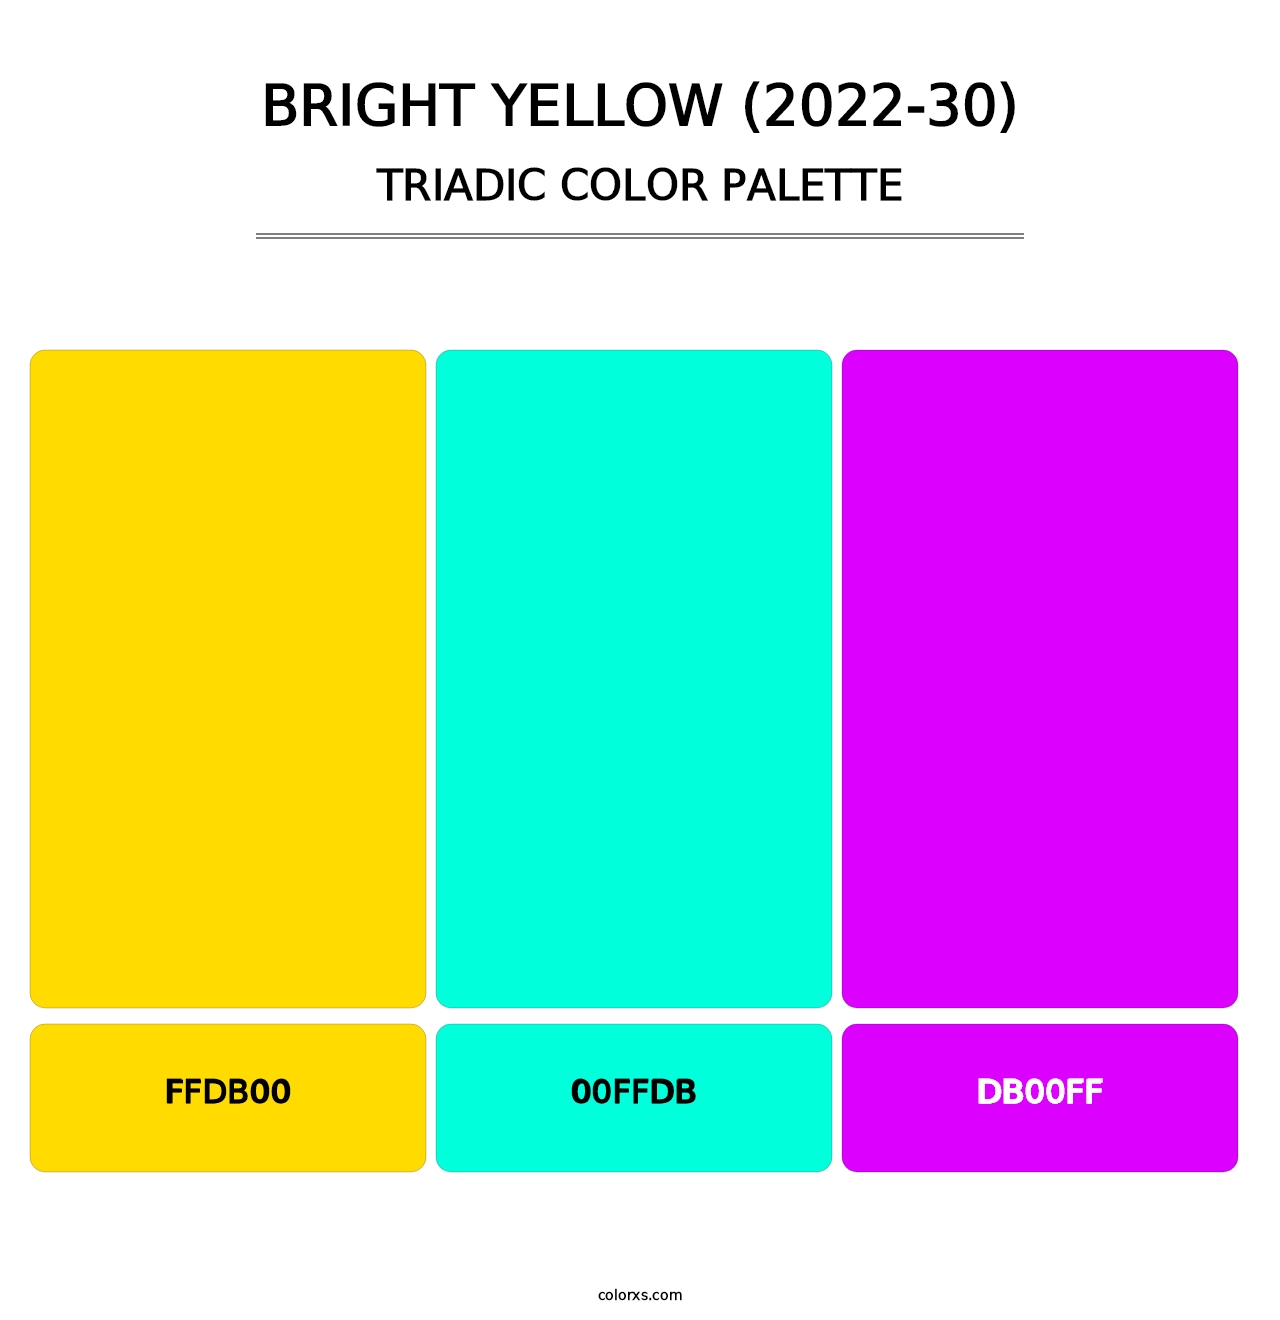 Bright Yellow (2022-30) - Triadic Color Palette